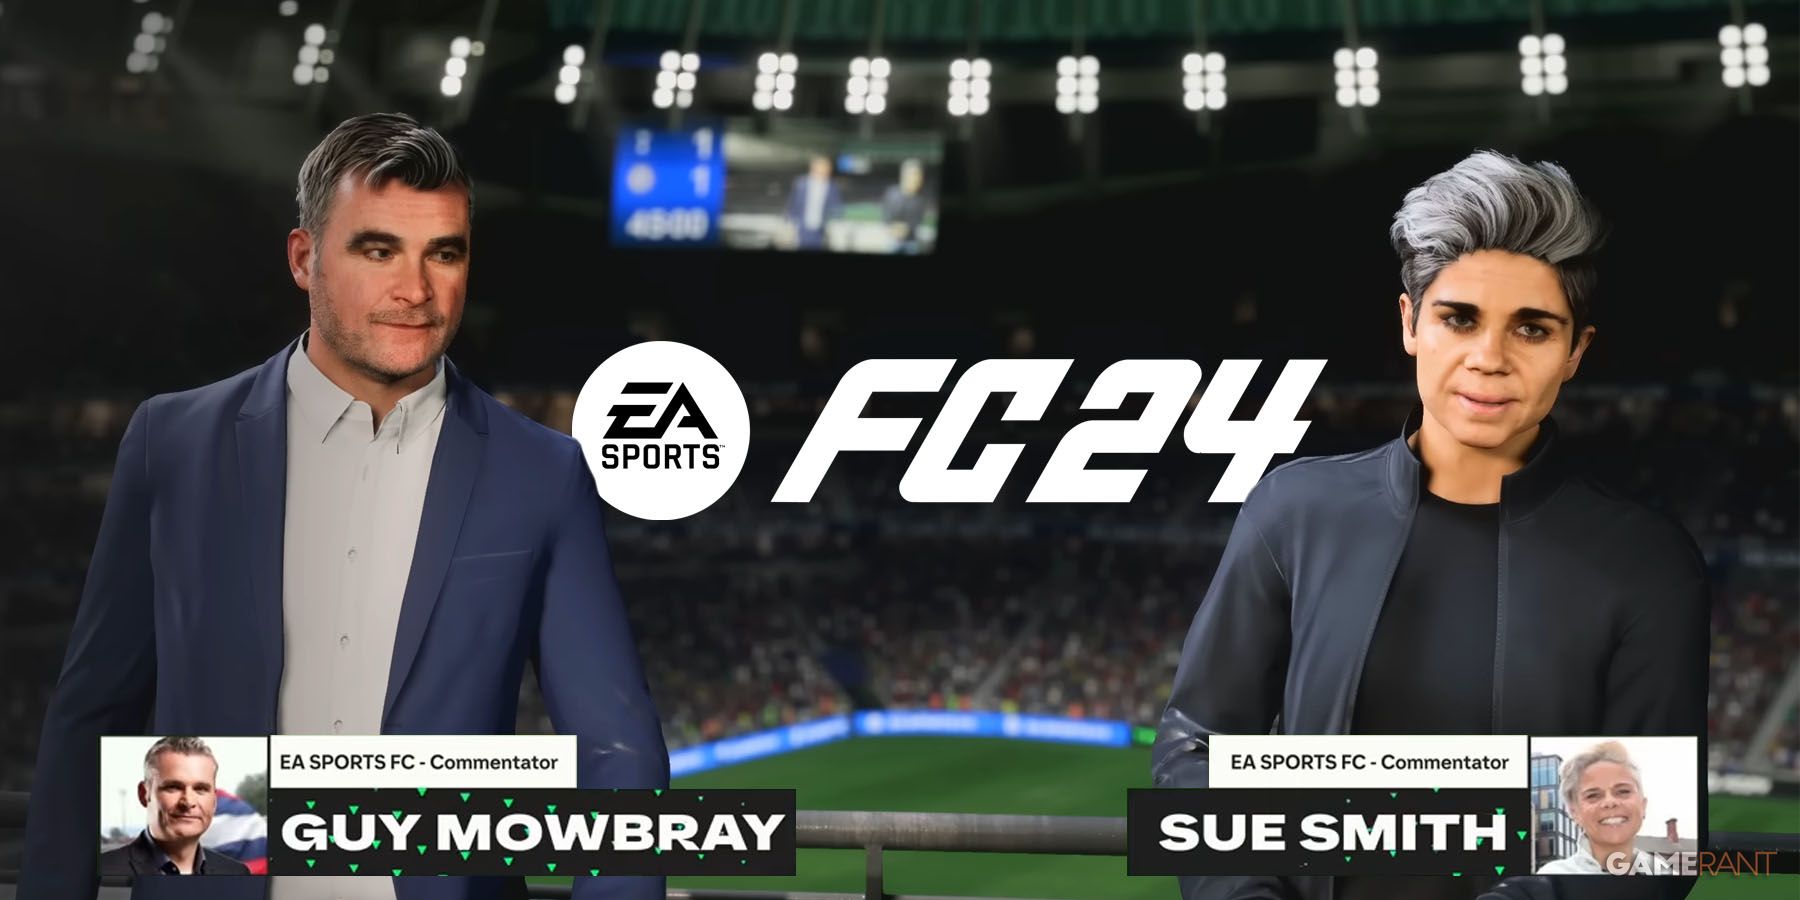 Guy Mowbray and Sue Smith in EA Sports FC 24